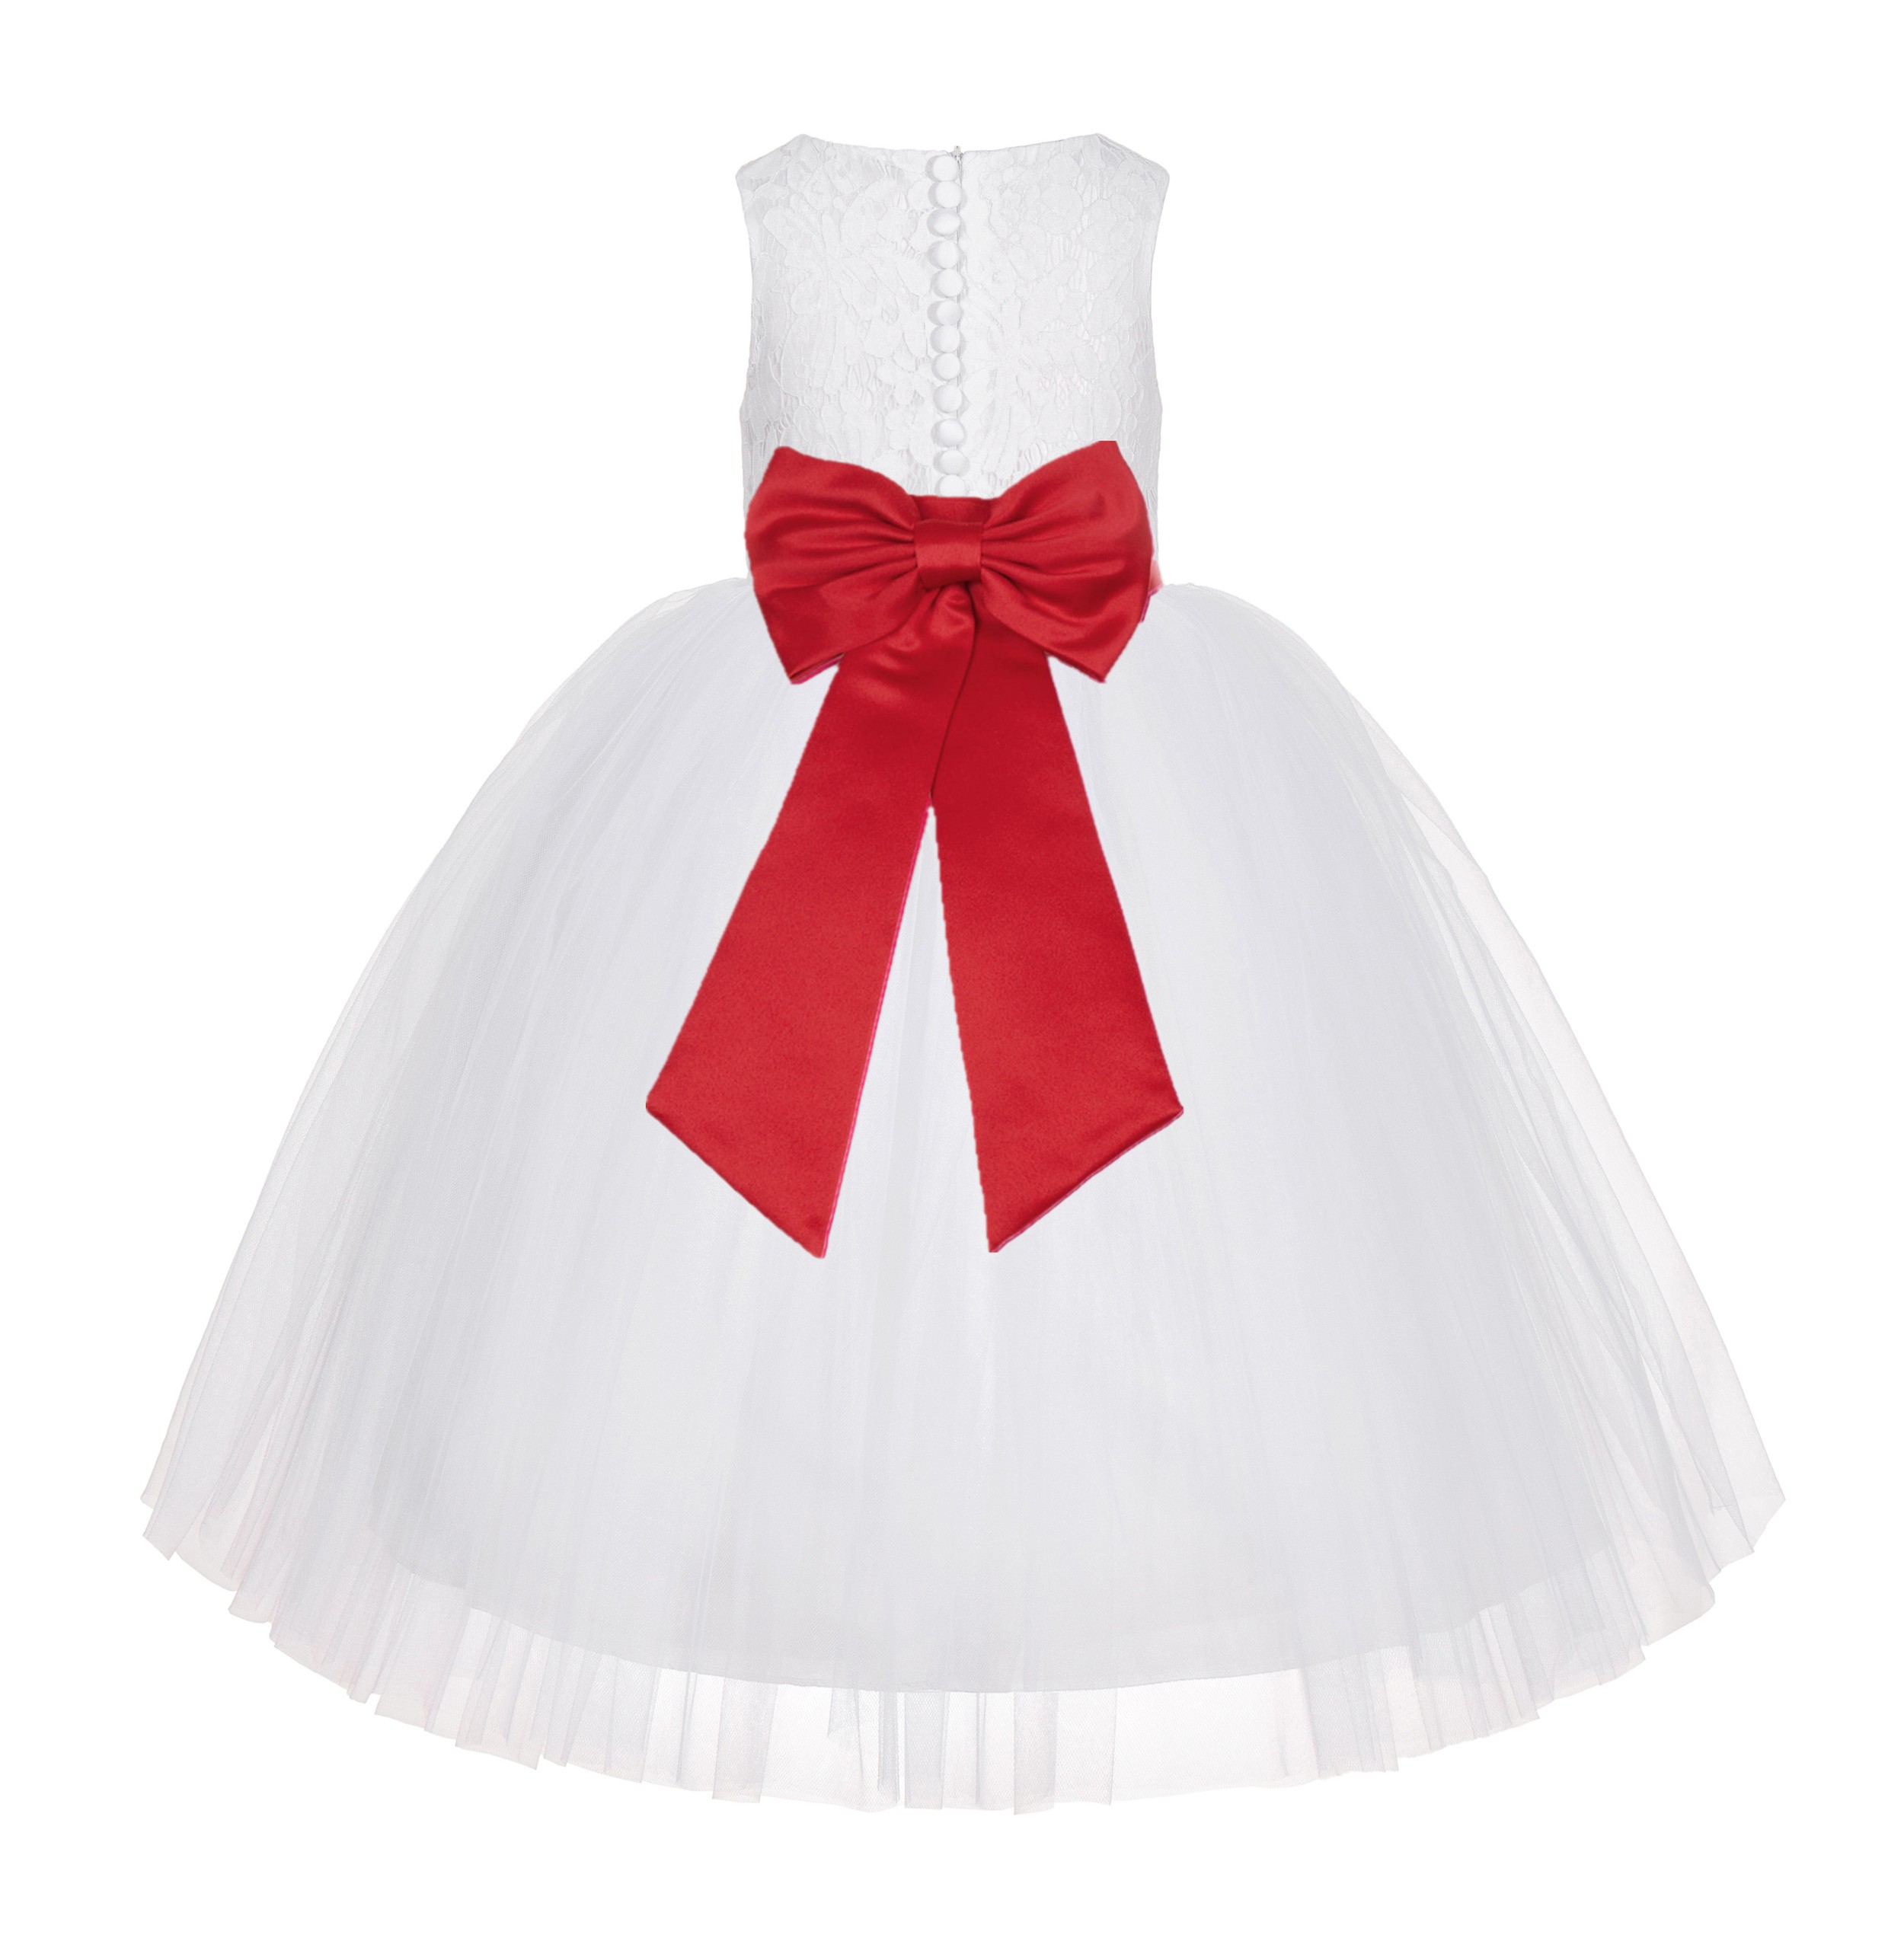 White / Red Floral Lace Flower Girl Dress White Ball Gown Lg7